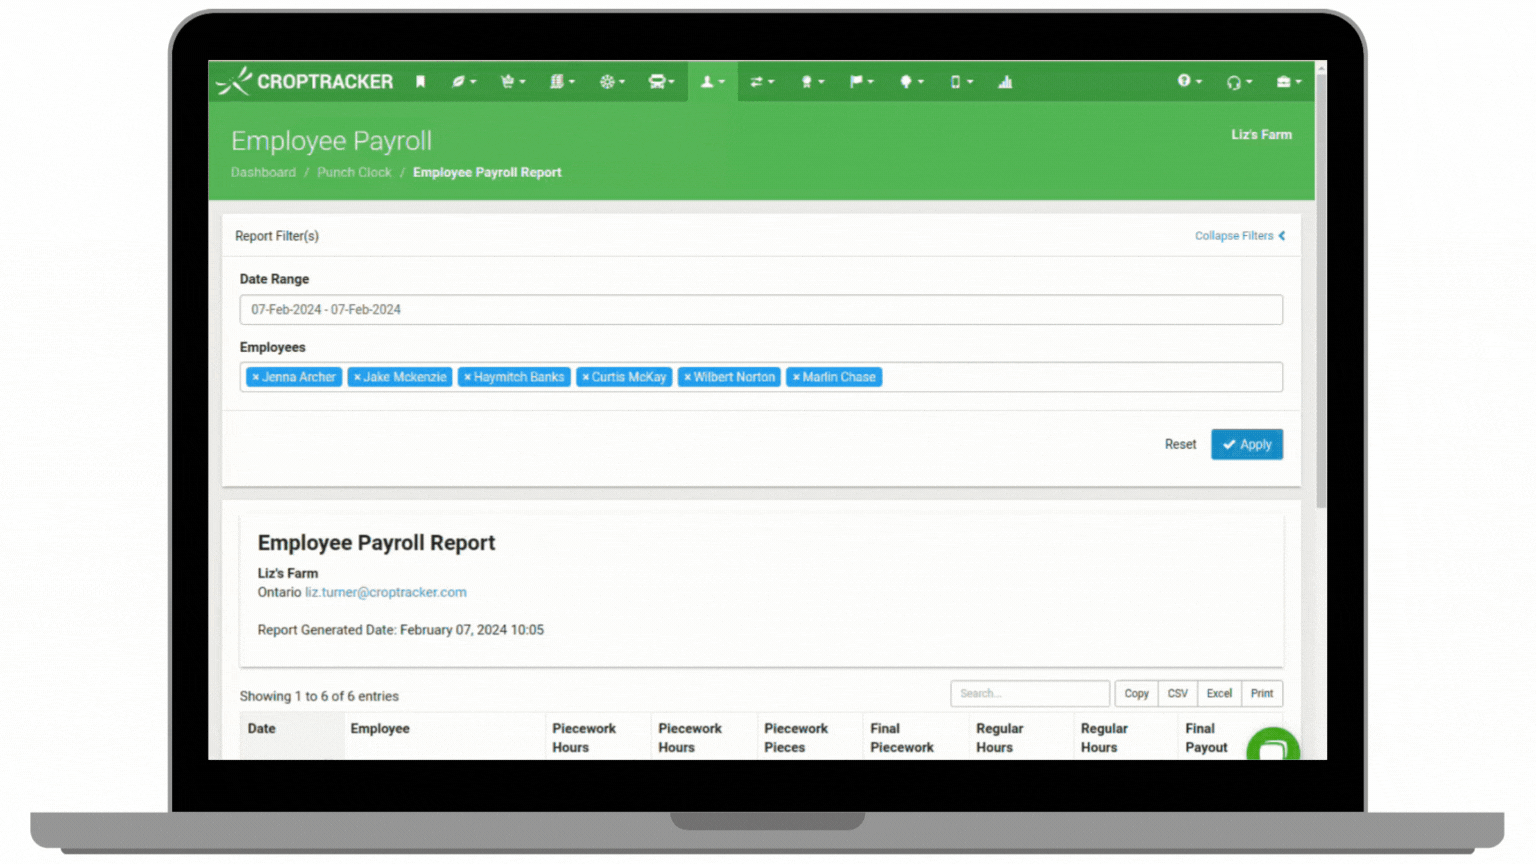 Scrolling through the employee payroll report in croptracker